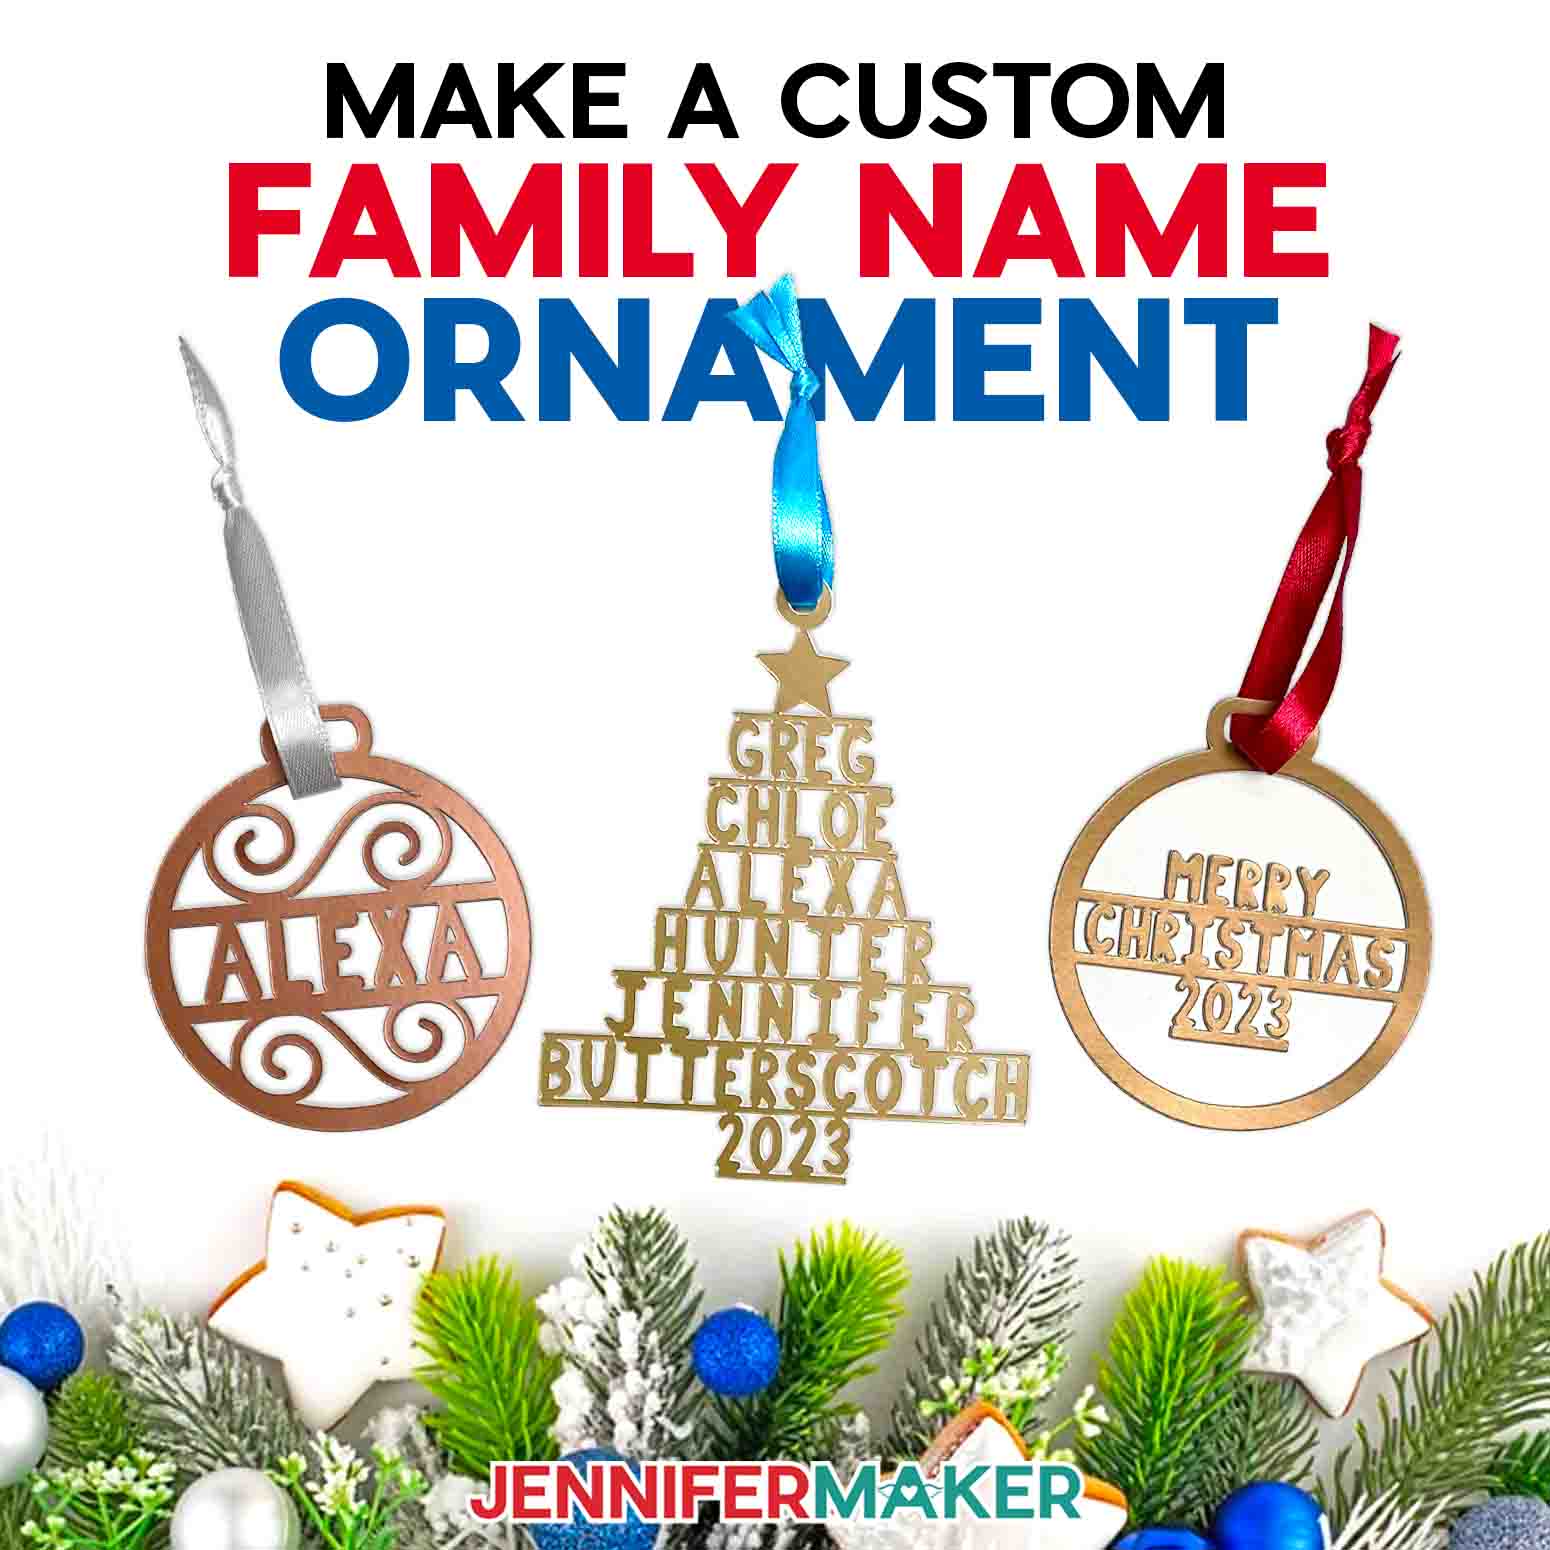 Make A Custom Family Name Ornament From Paper